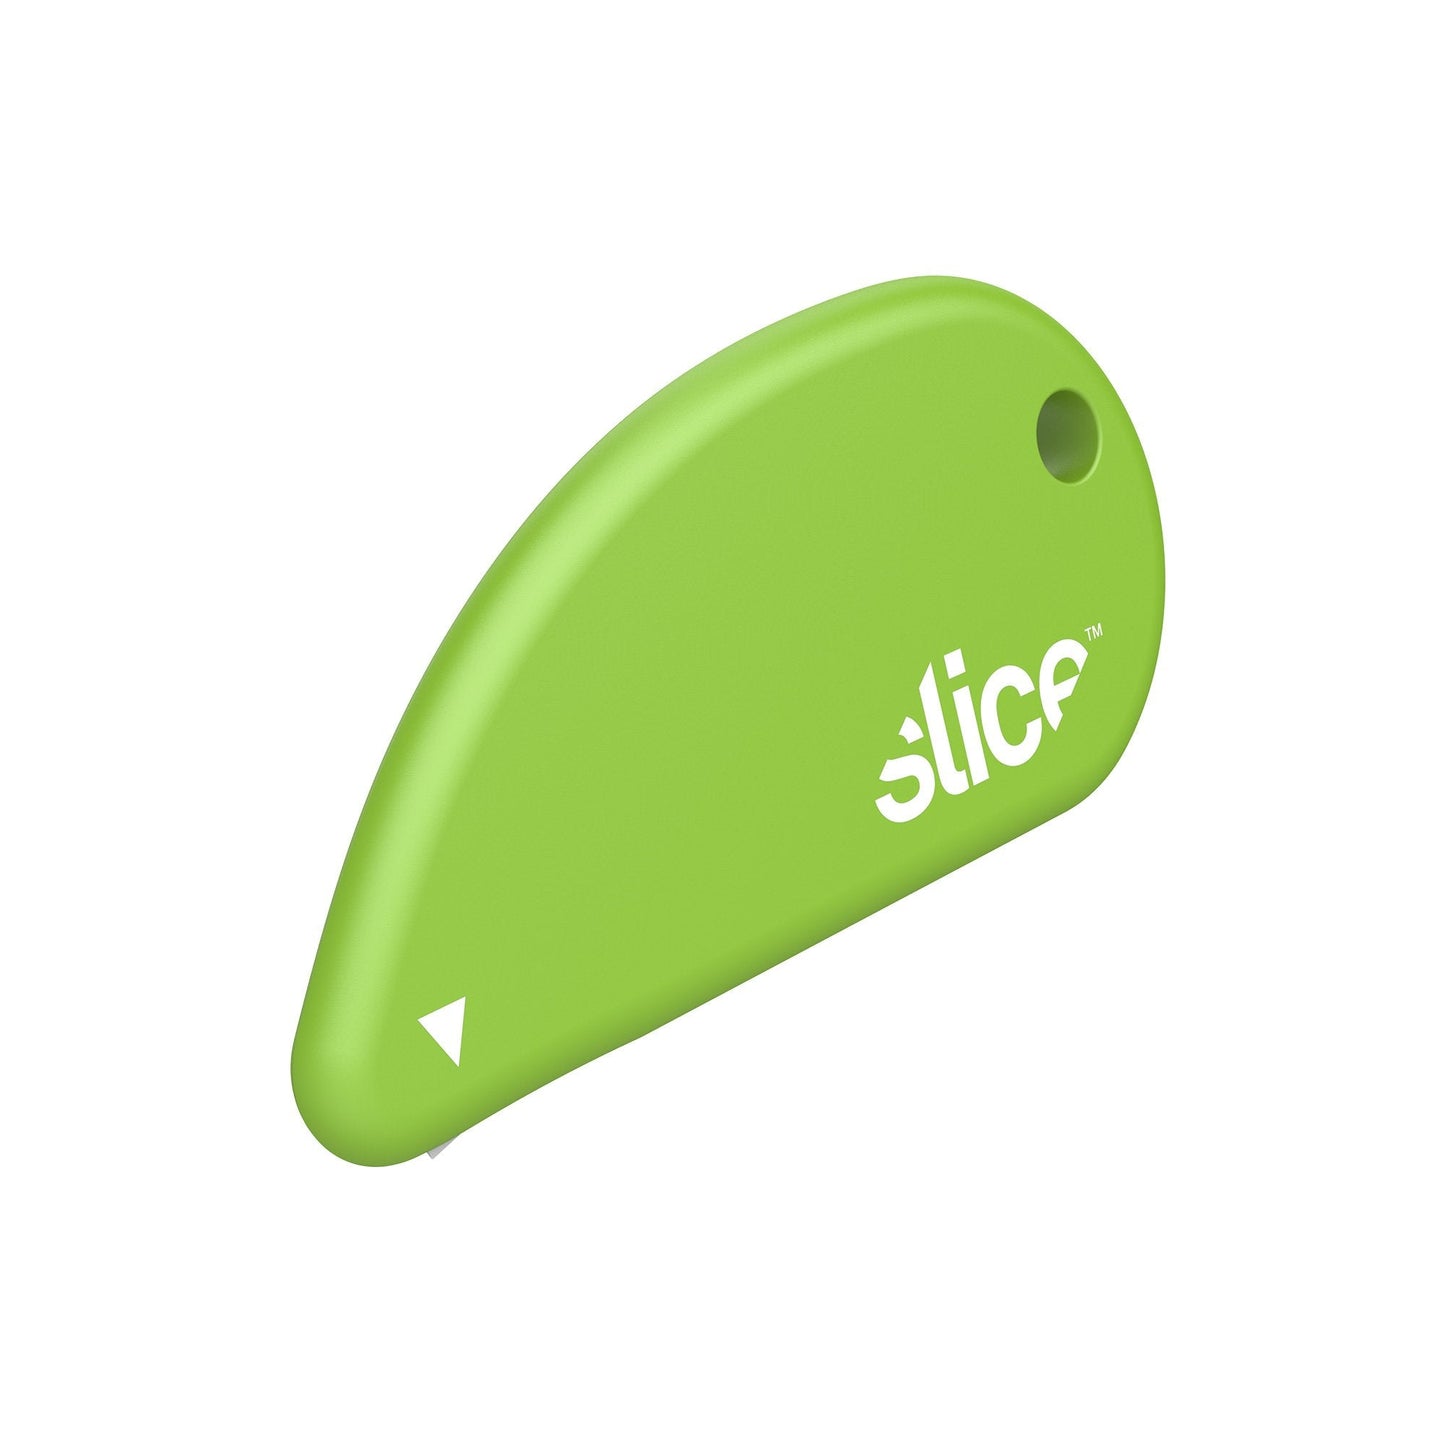 The Slice® 00200 Safety Cutter with micro-ceramic blade